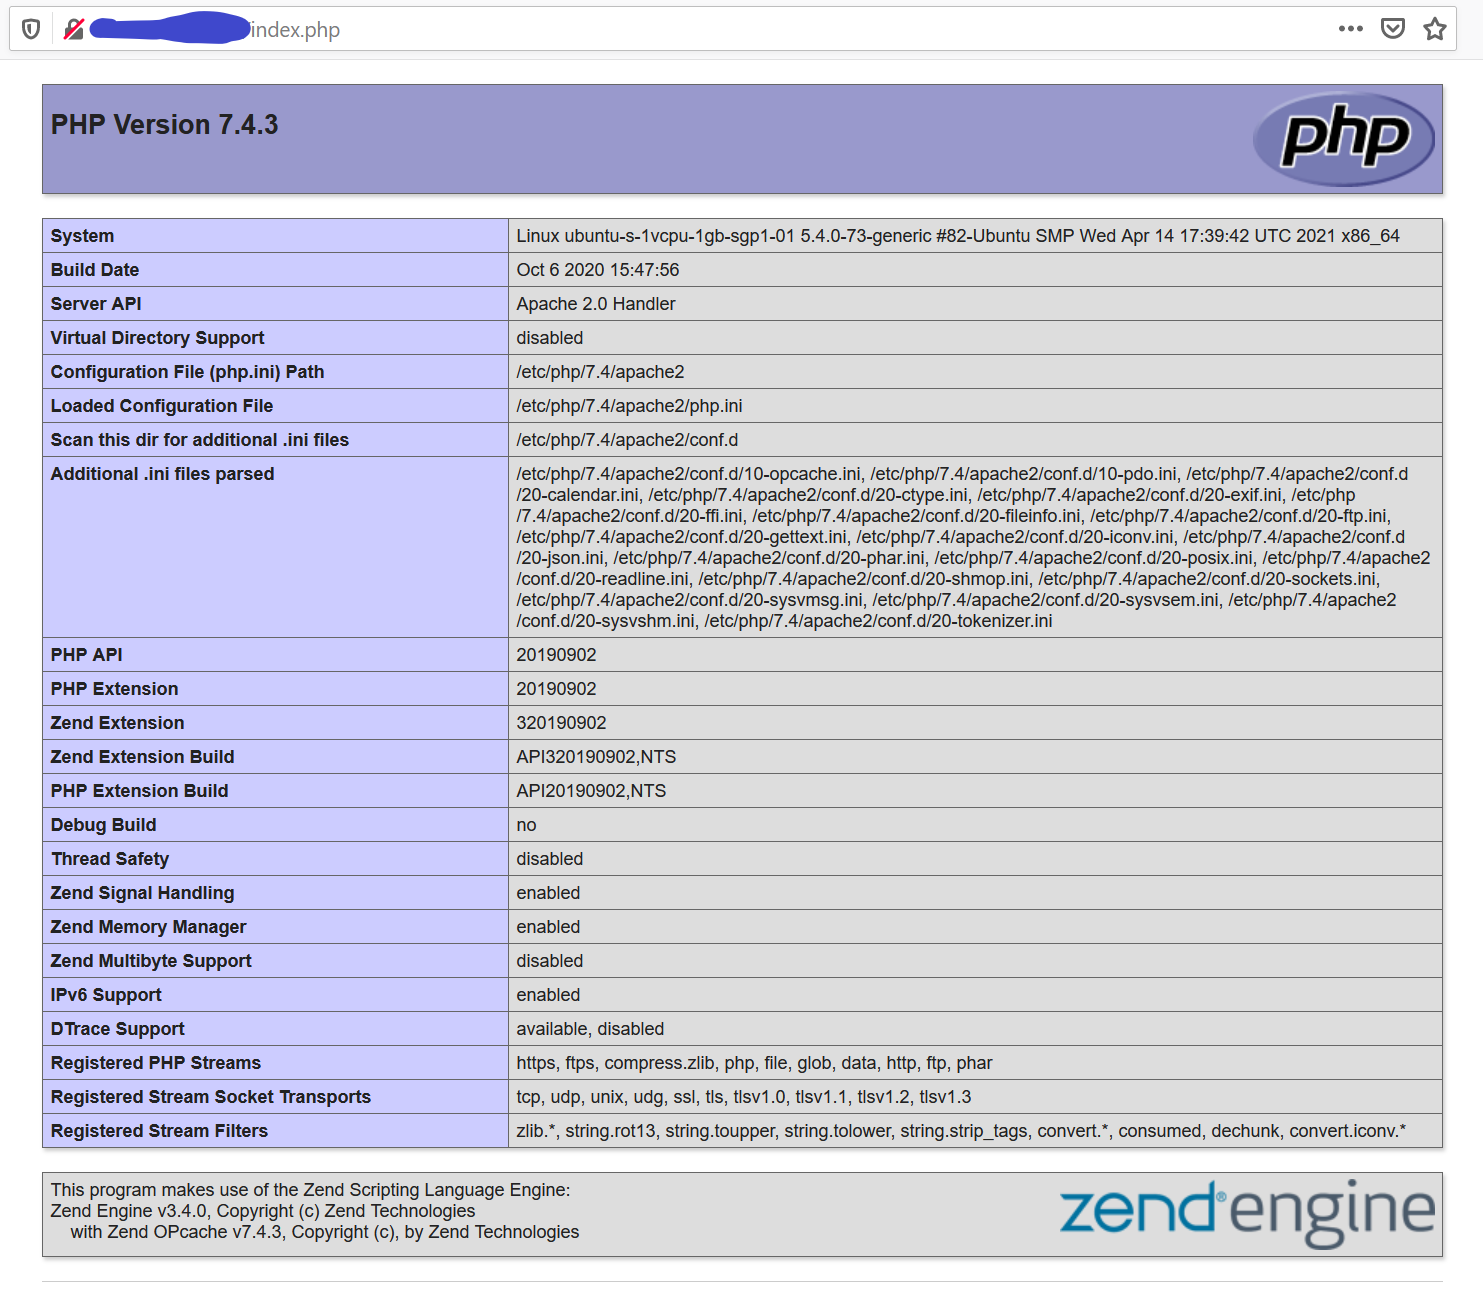 installing-php-and-common-php-extensions-result